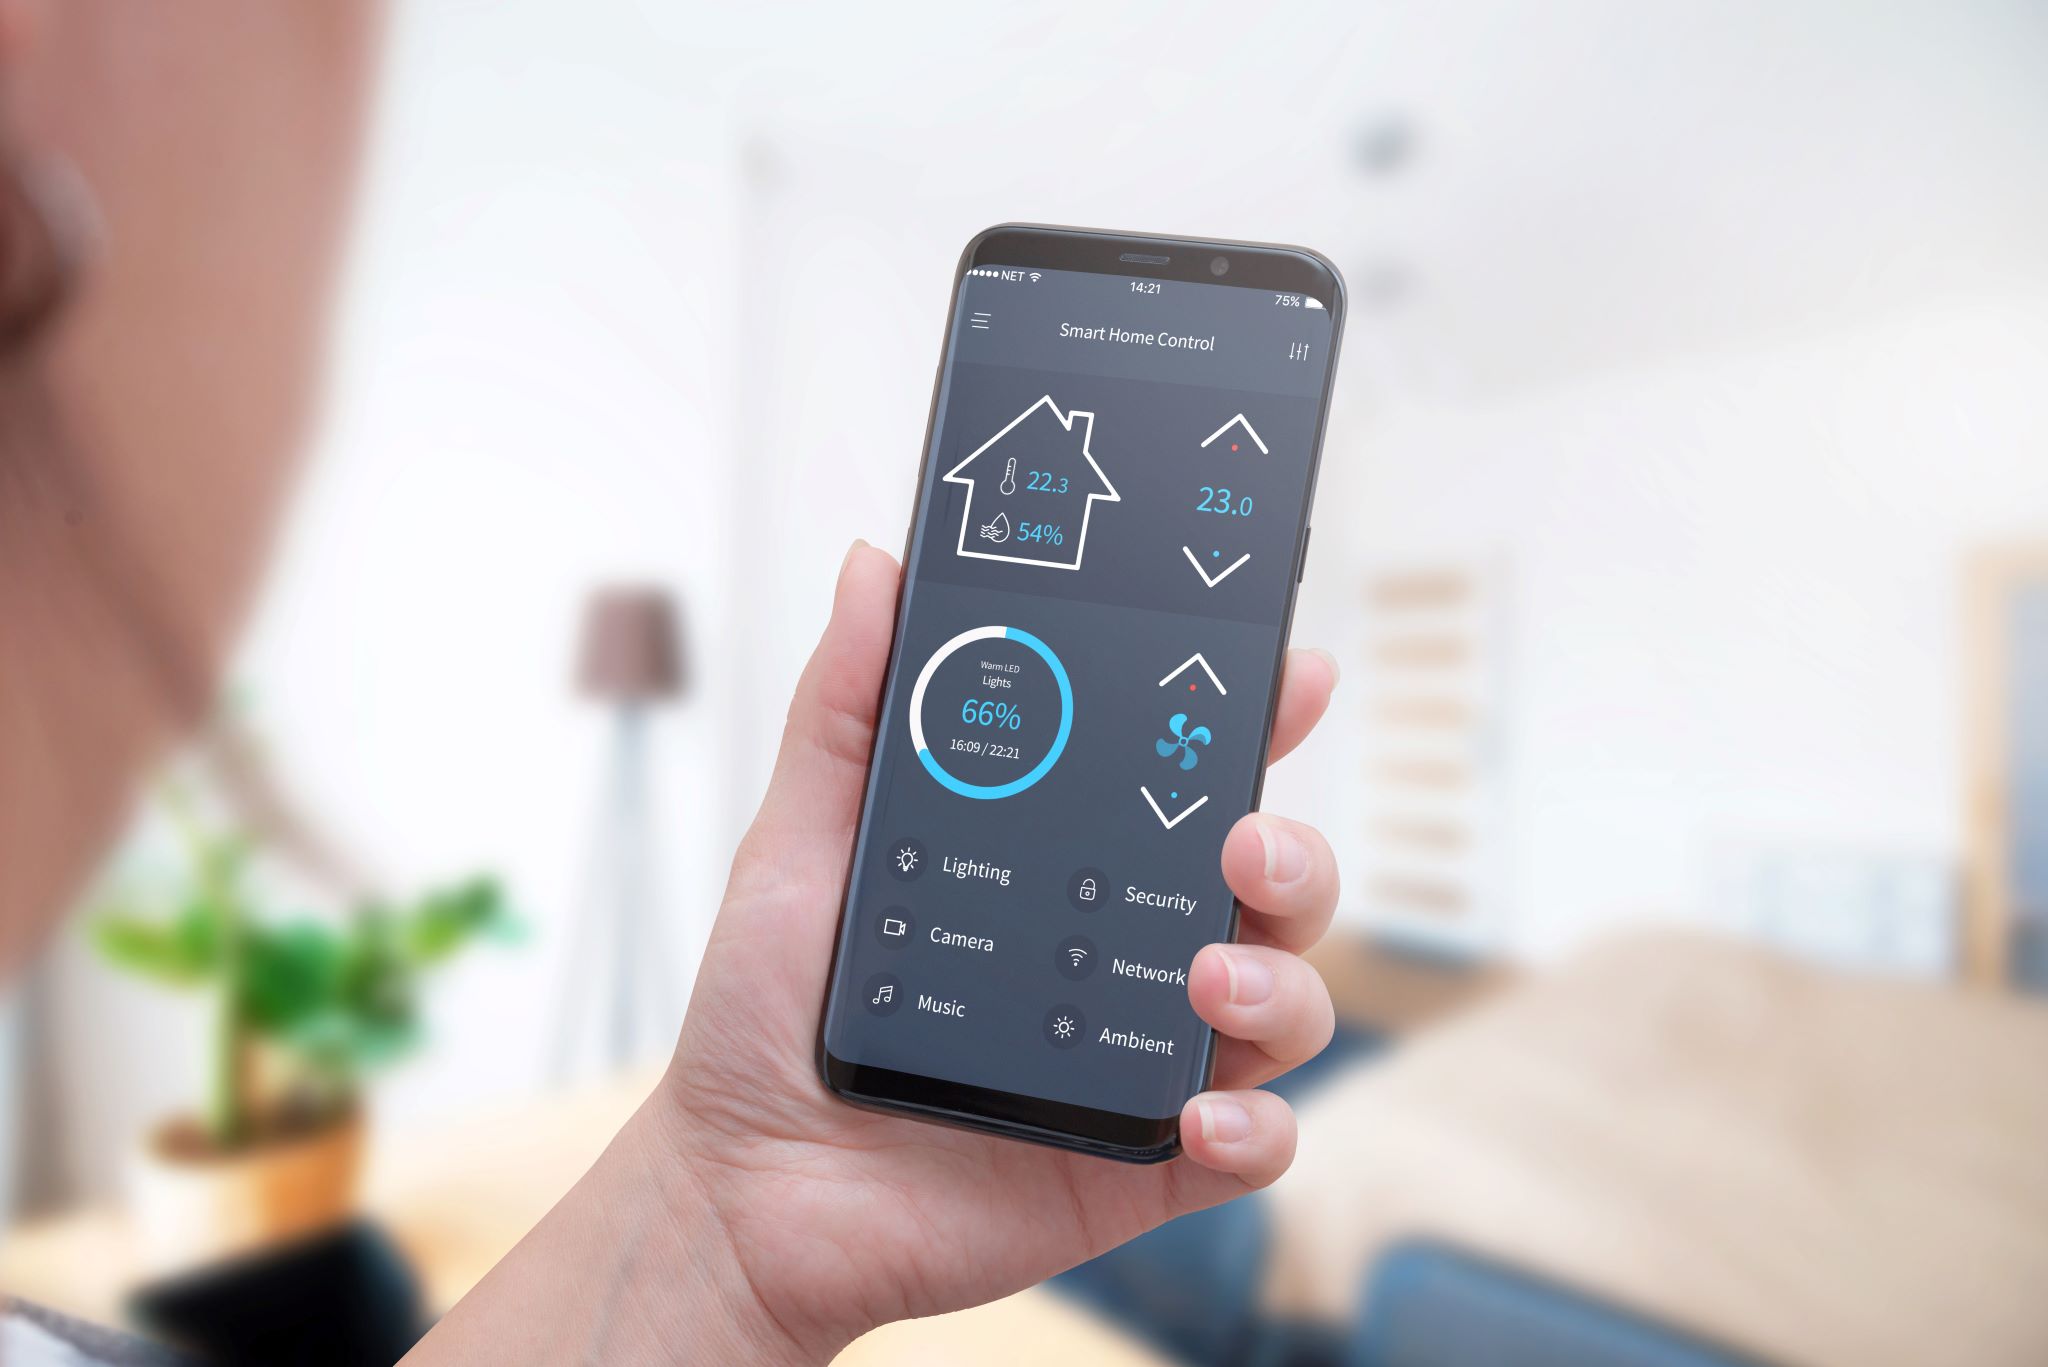 Smart home control app opened on a smartphone